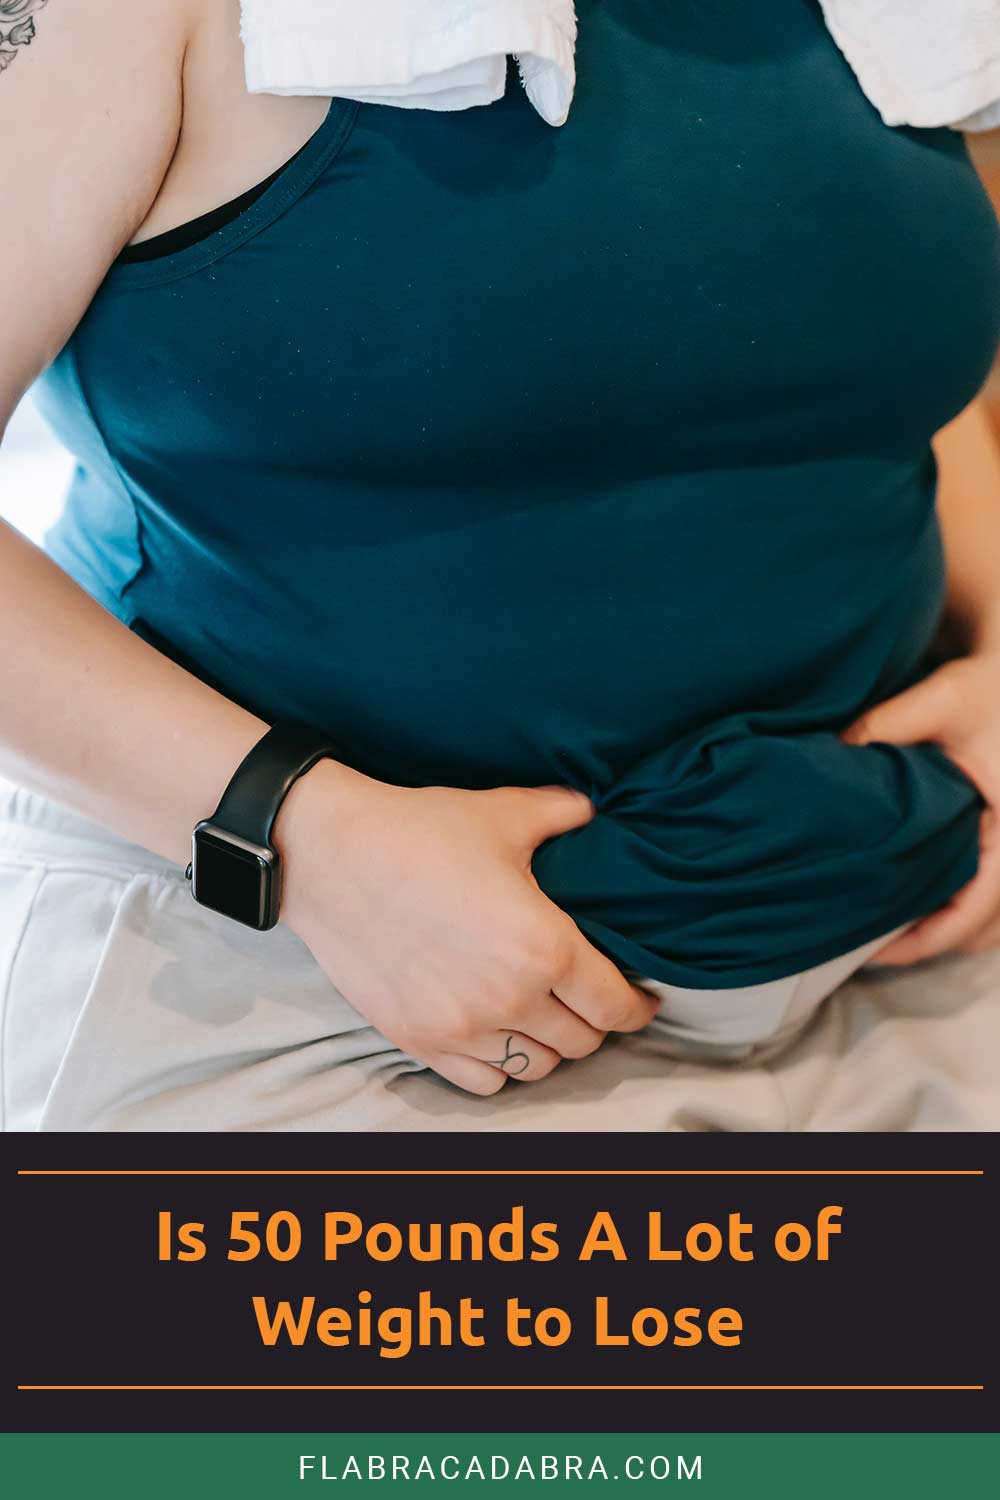 Is 50 Pounds A Lot of Weight to Lose?